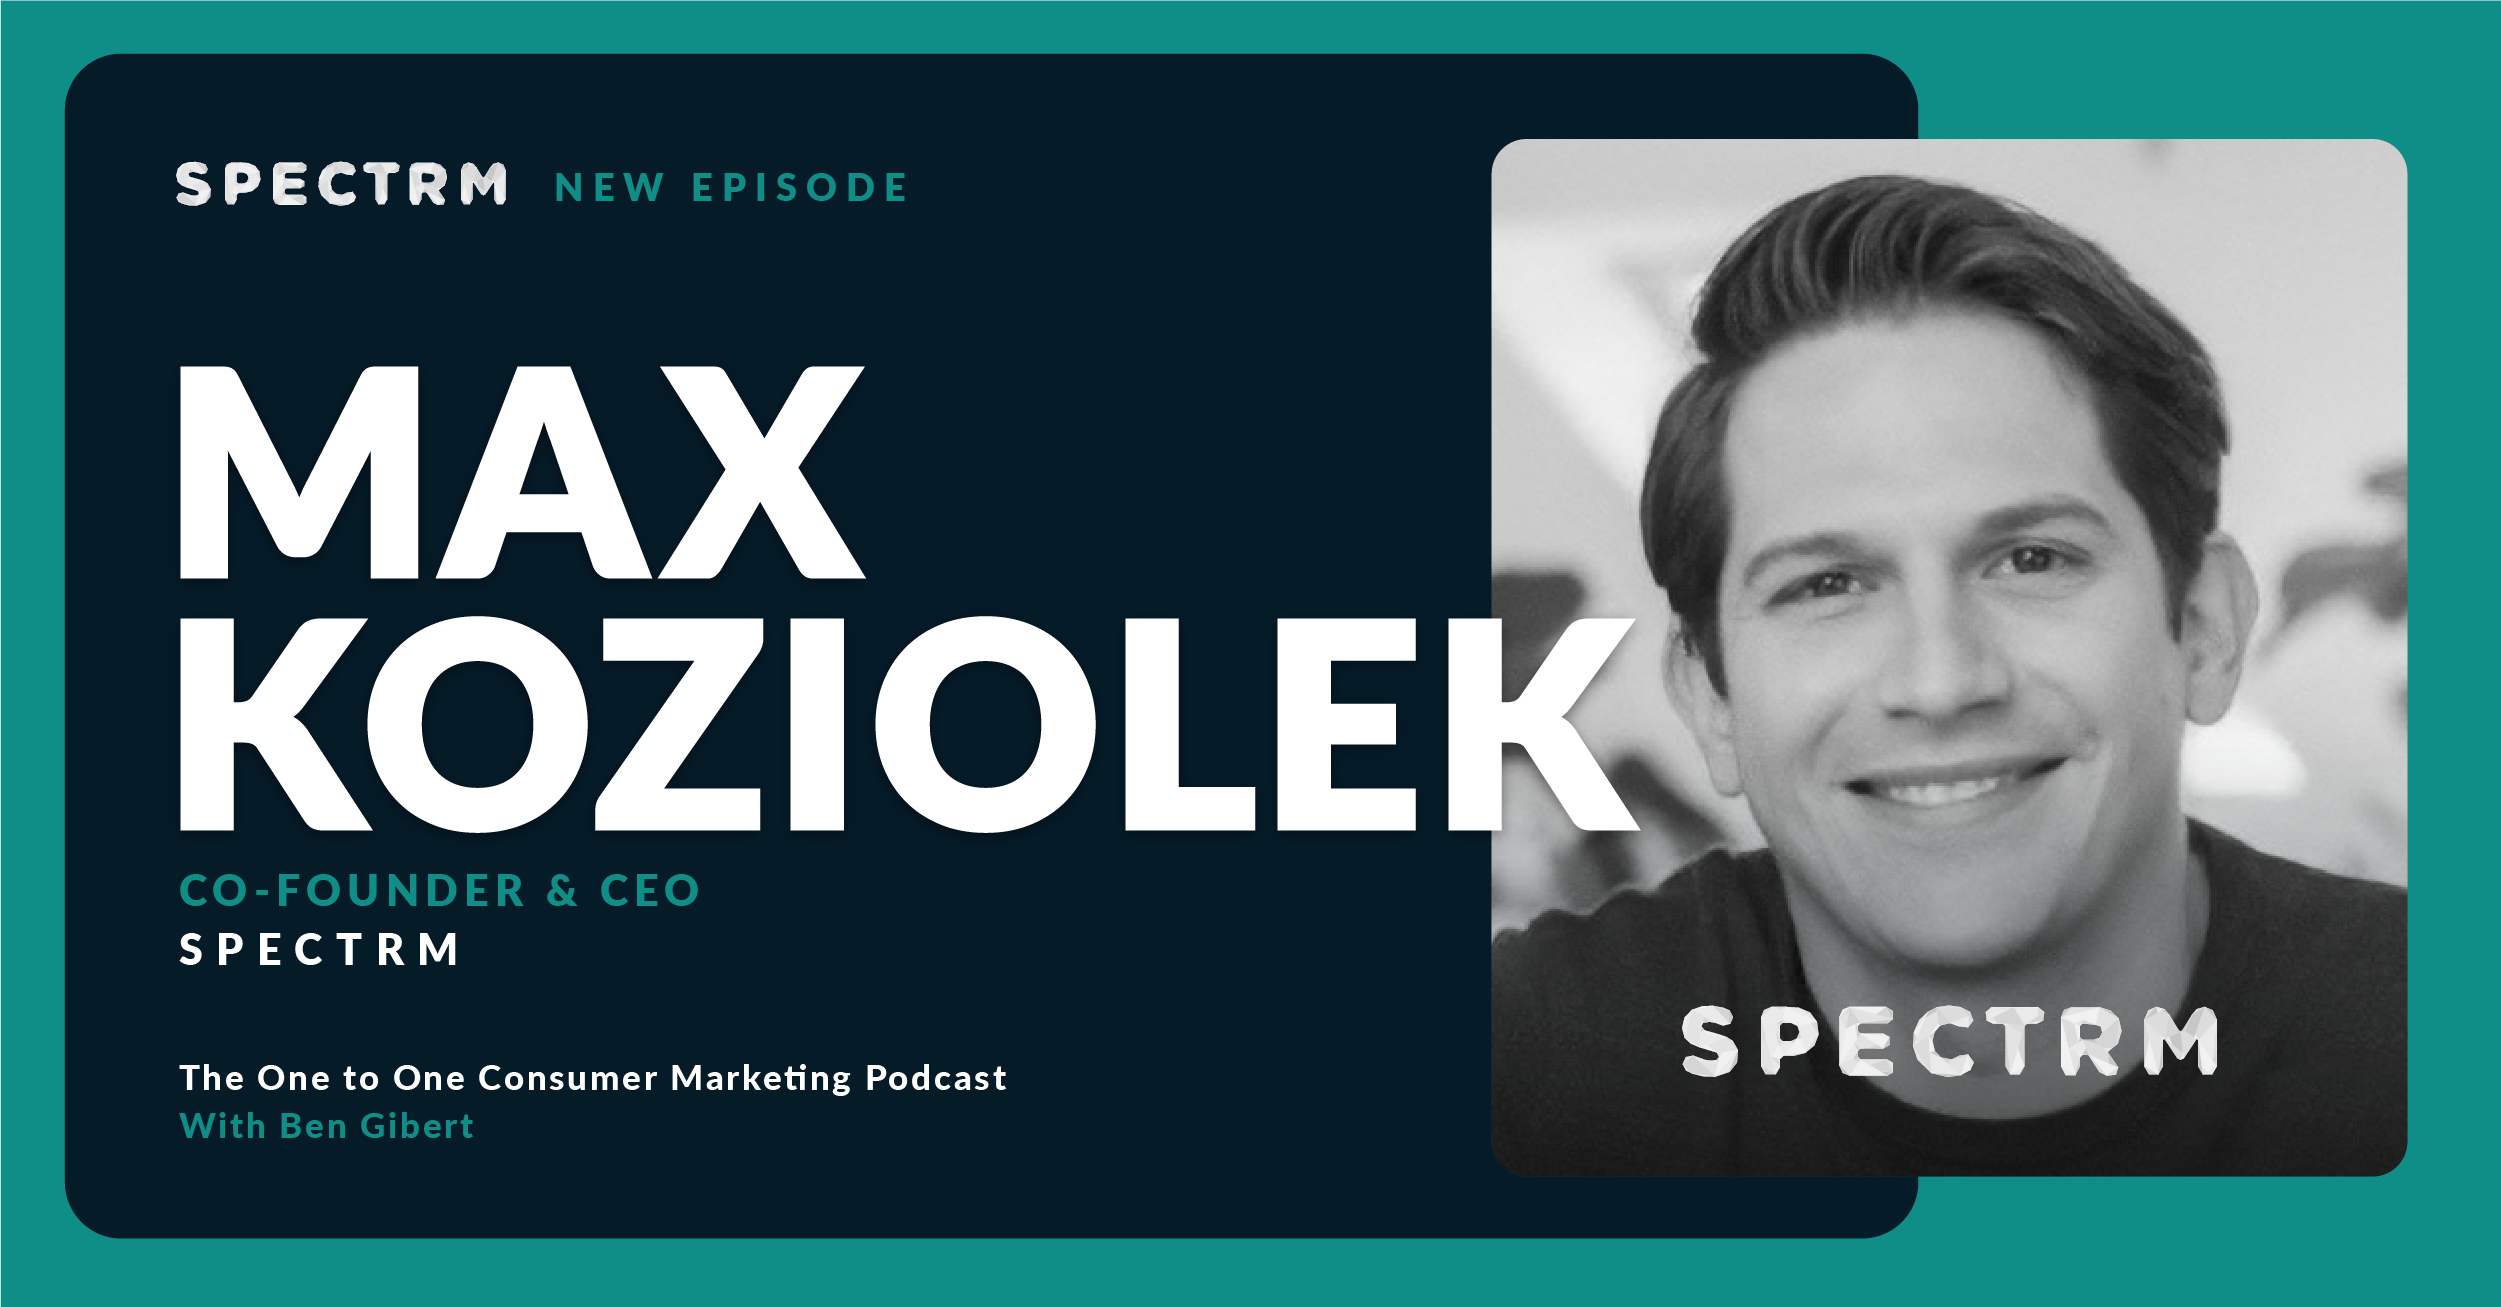 Spectrm's Max Koziolek on Podcast Lessons Learned from the One to One Consumer Marketing Podcast and the Vision for Its Future